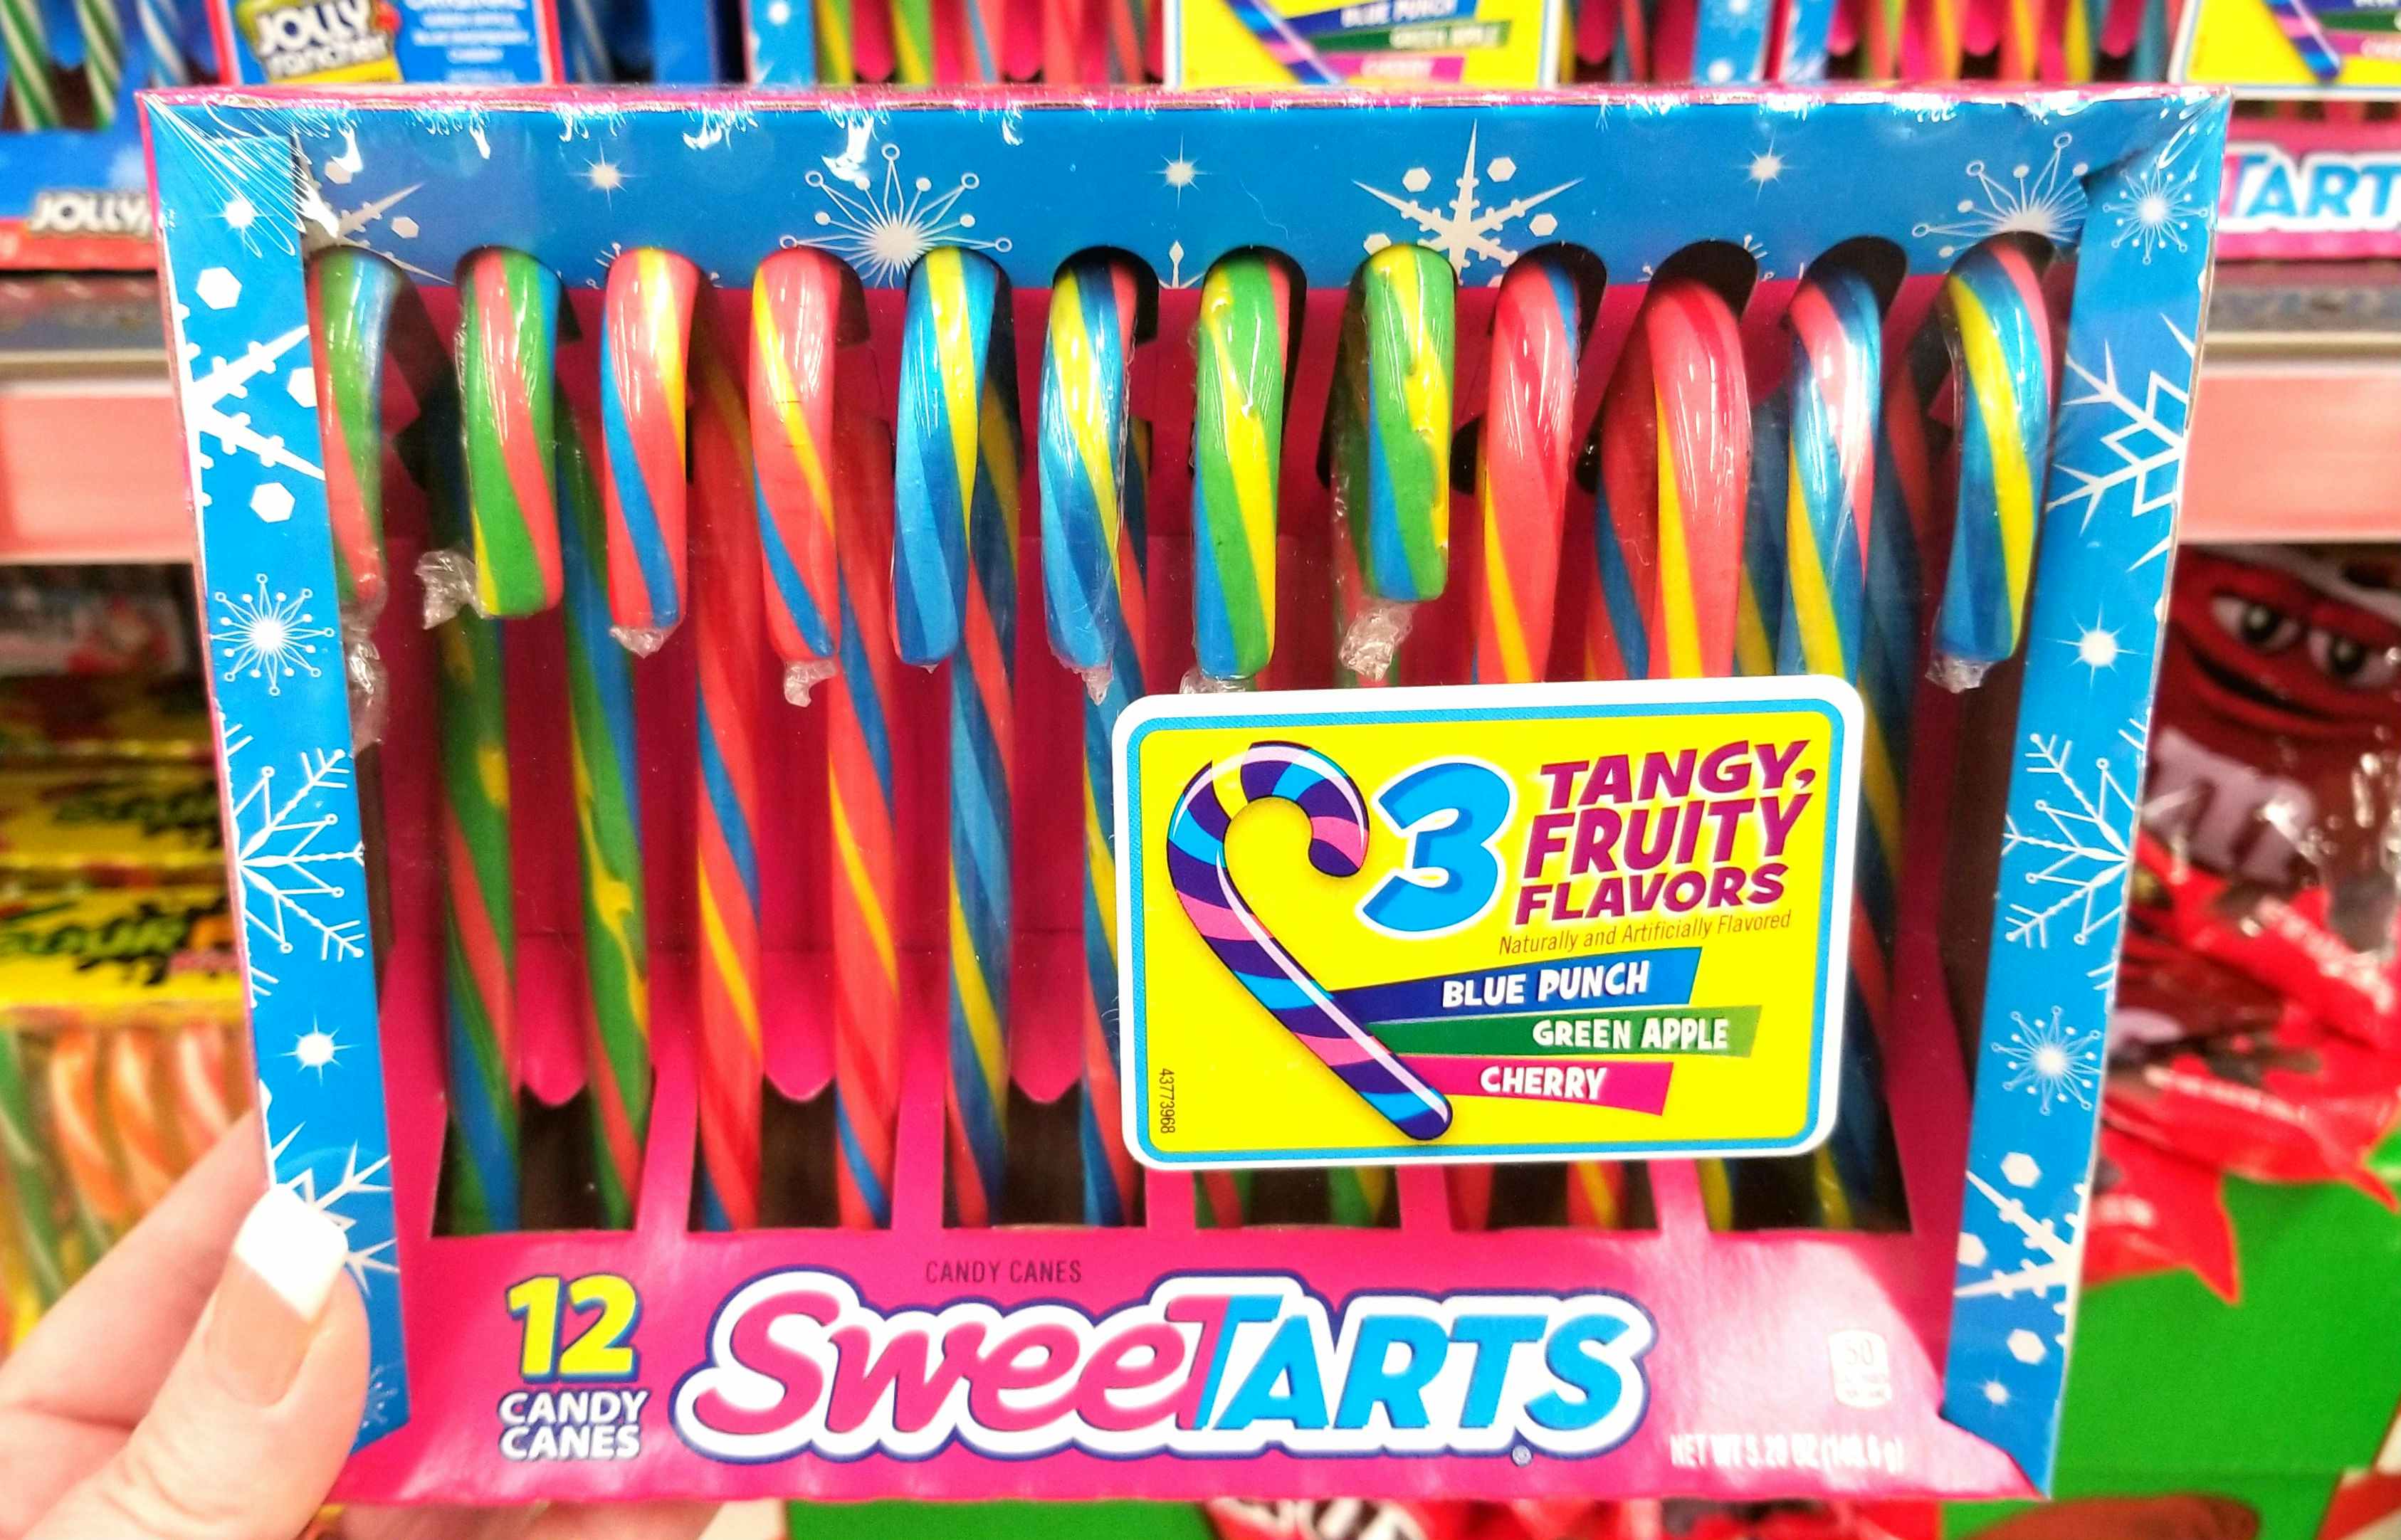 A person holding a packages of Sweetart candy canes.